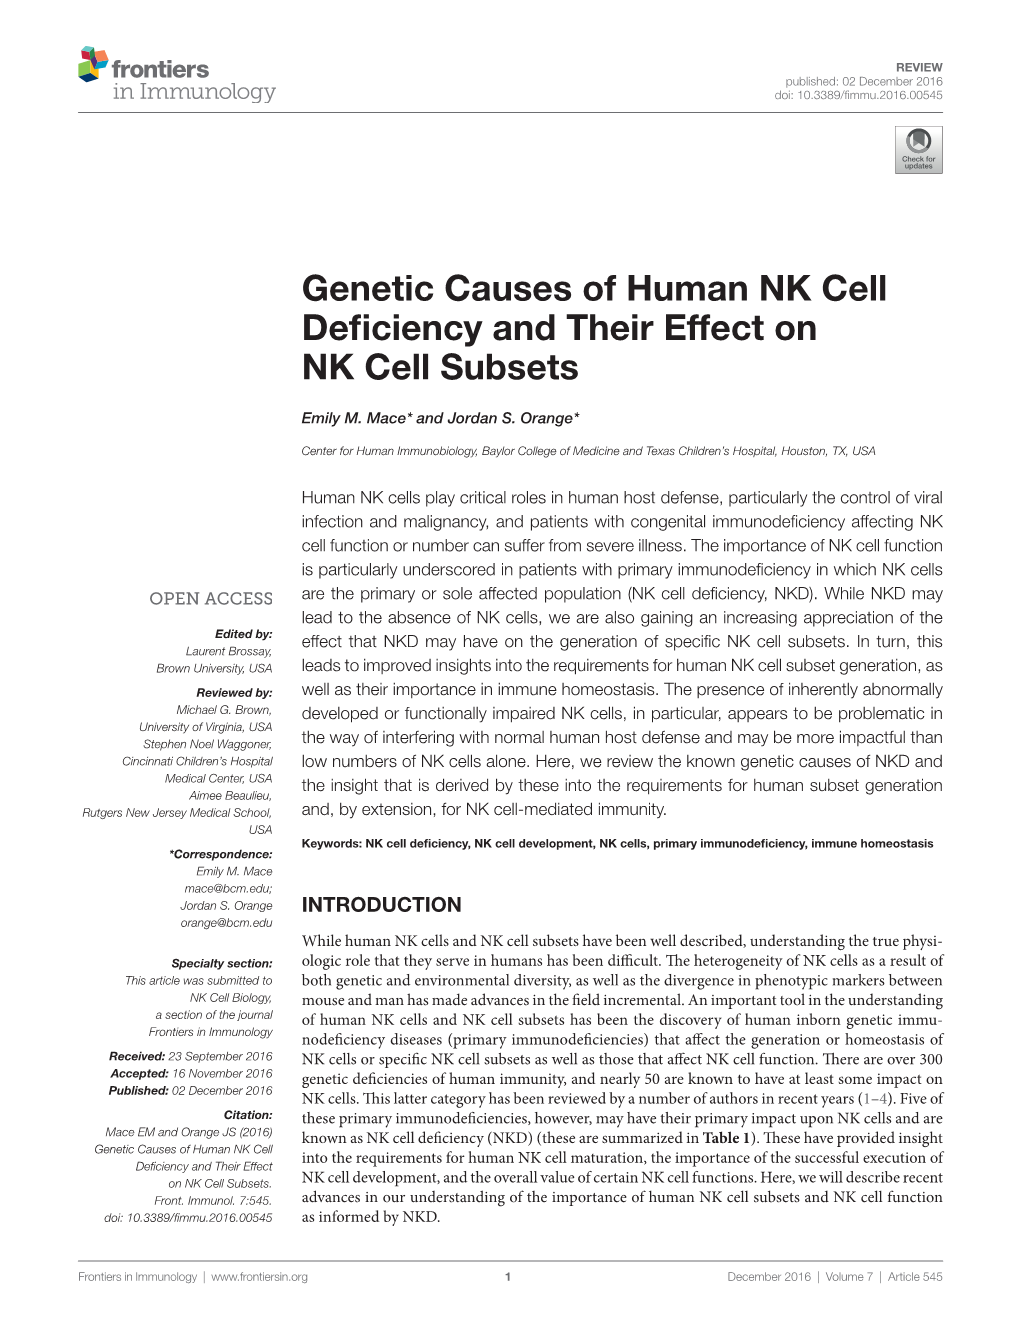 Genetic Causes of Human NK Cell Deficiency and Their Effect on NK Cell Subsets